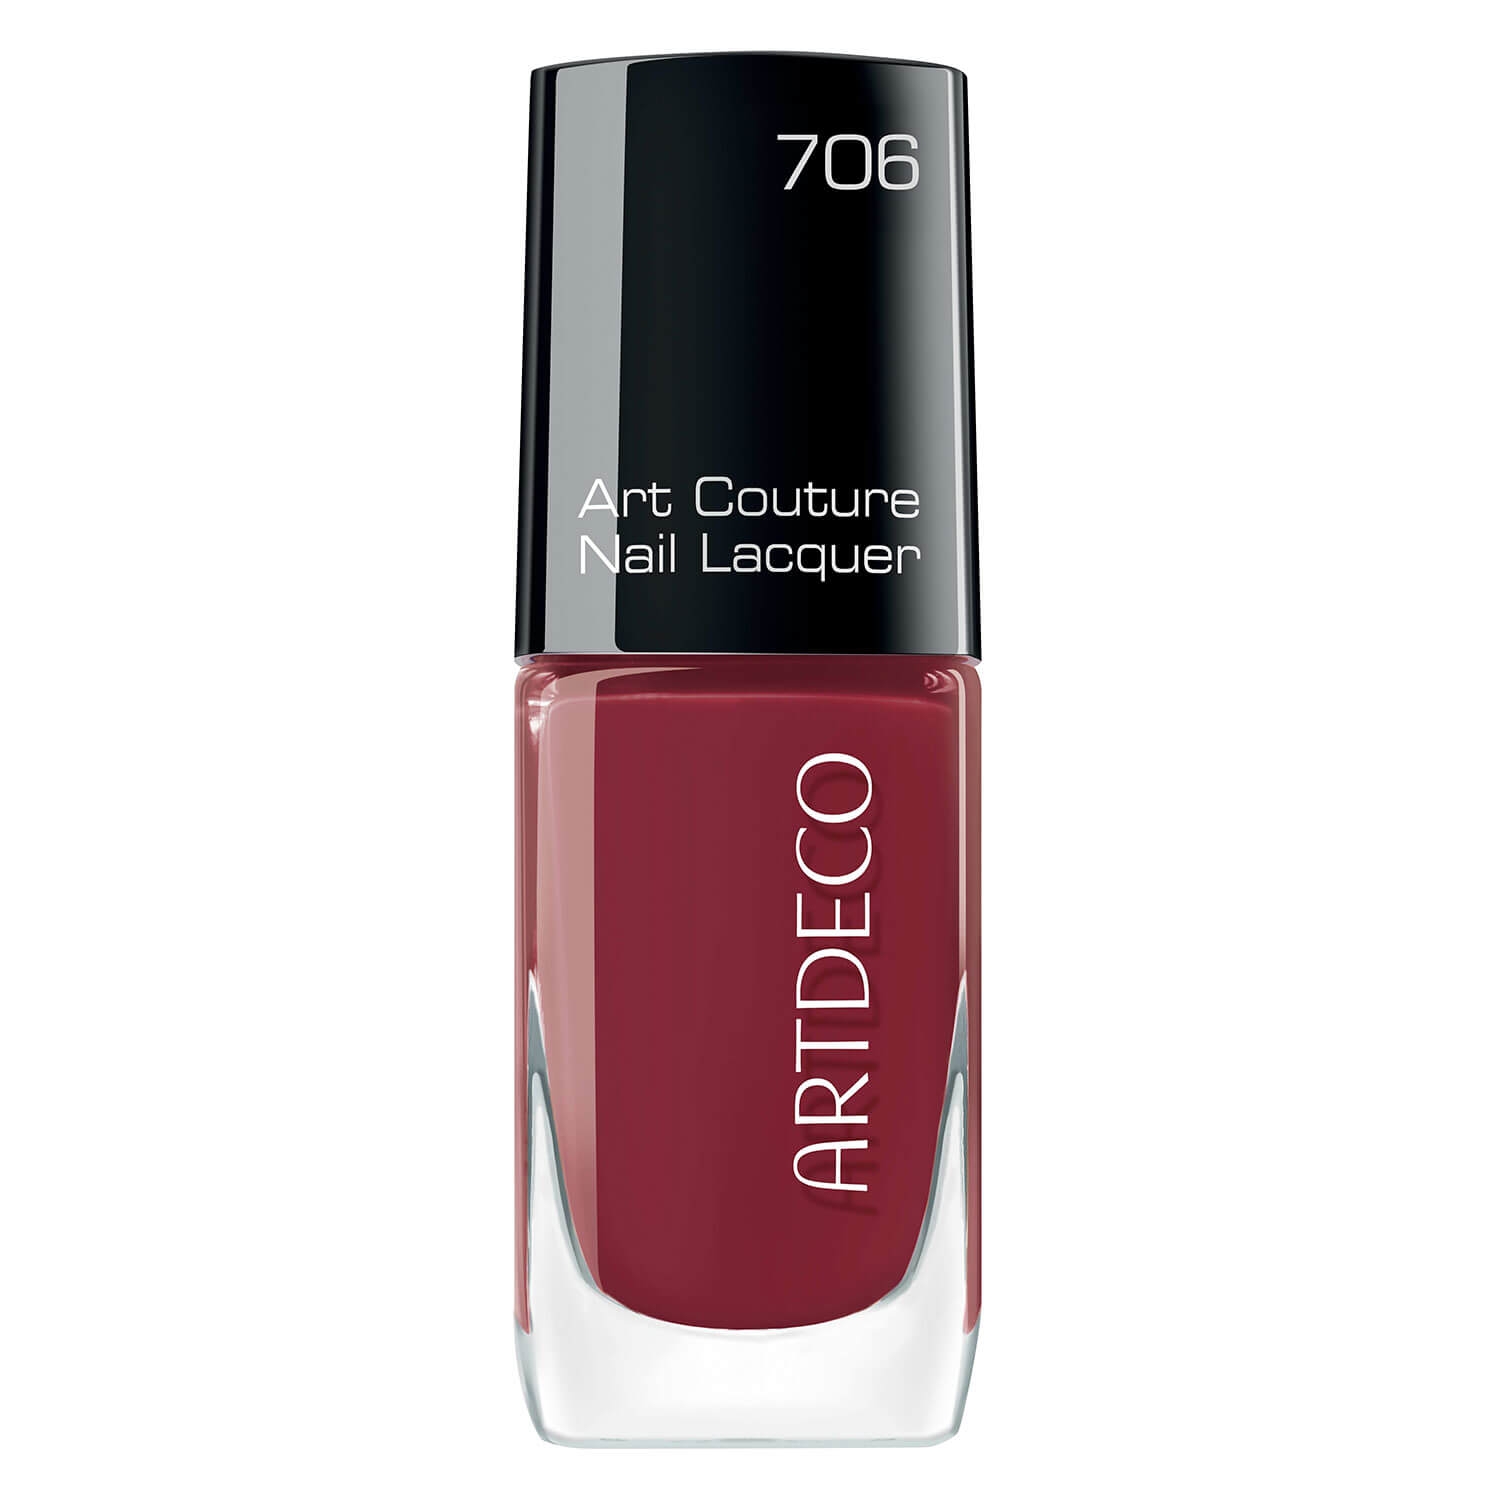 Product image from Beauty of Wilderness - Art Couture Nail Lacquer Tender Rose 706